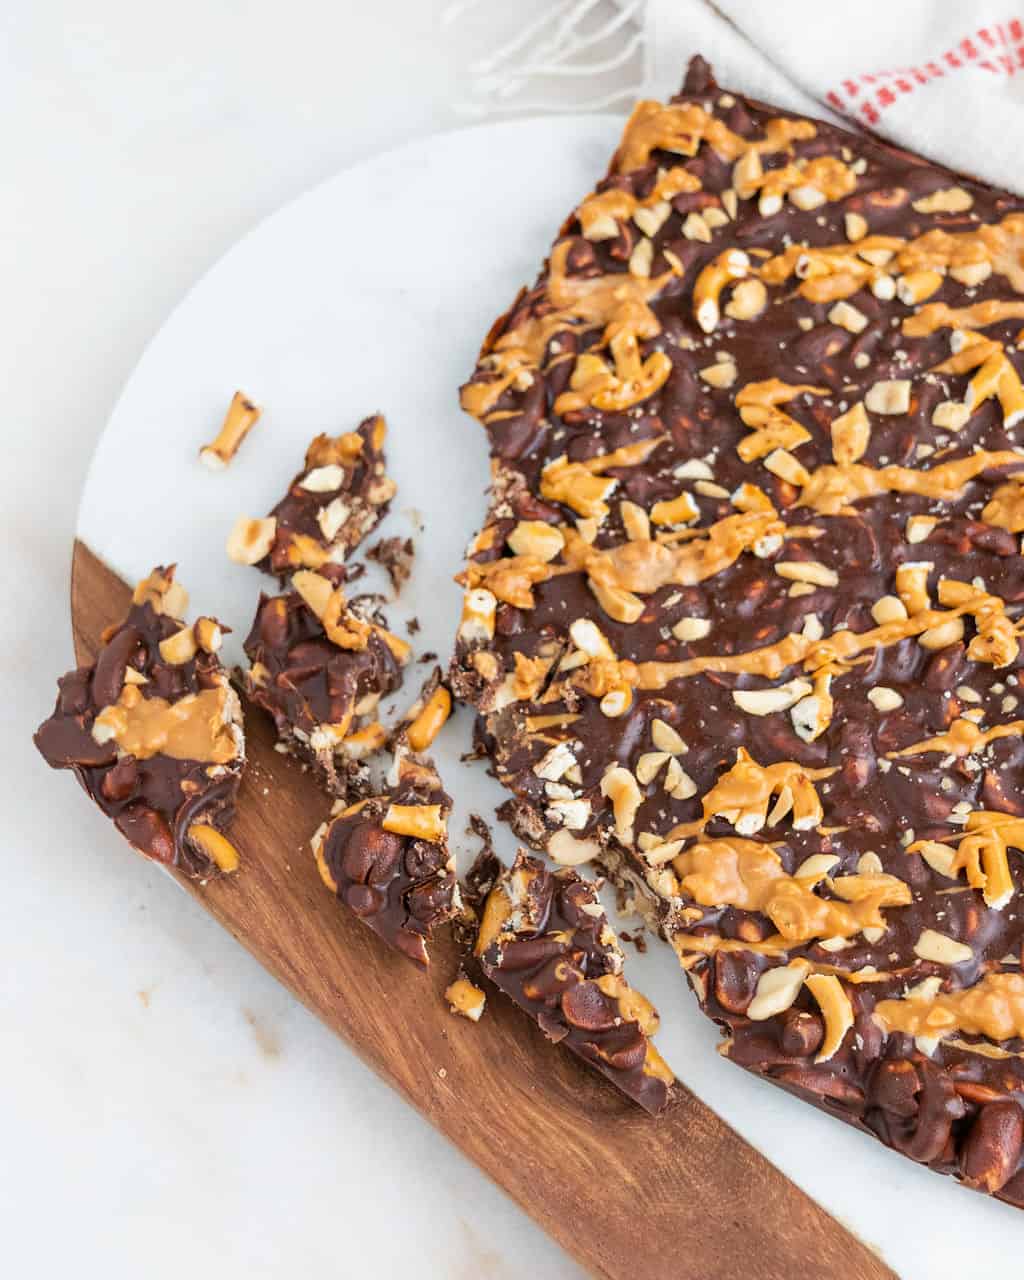 completed Chocolate Peanut Butter Bark on a cutting board with several pieces broken off